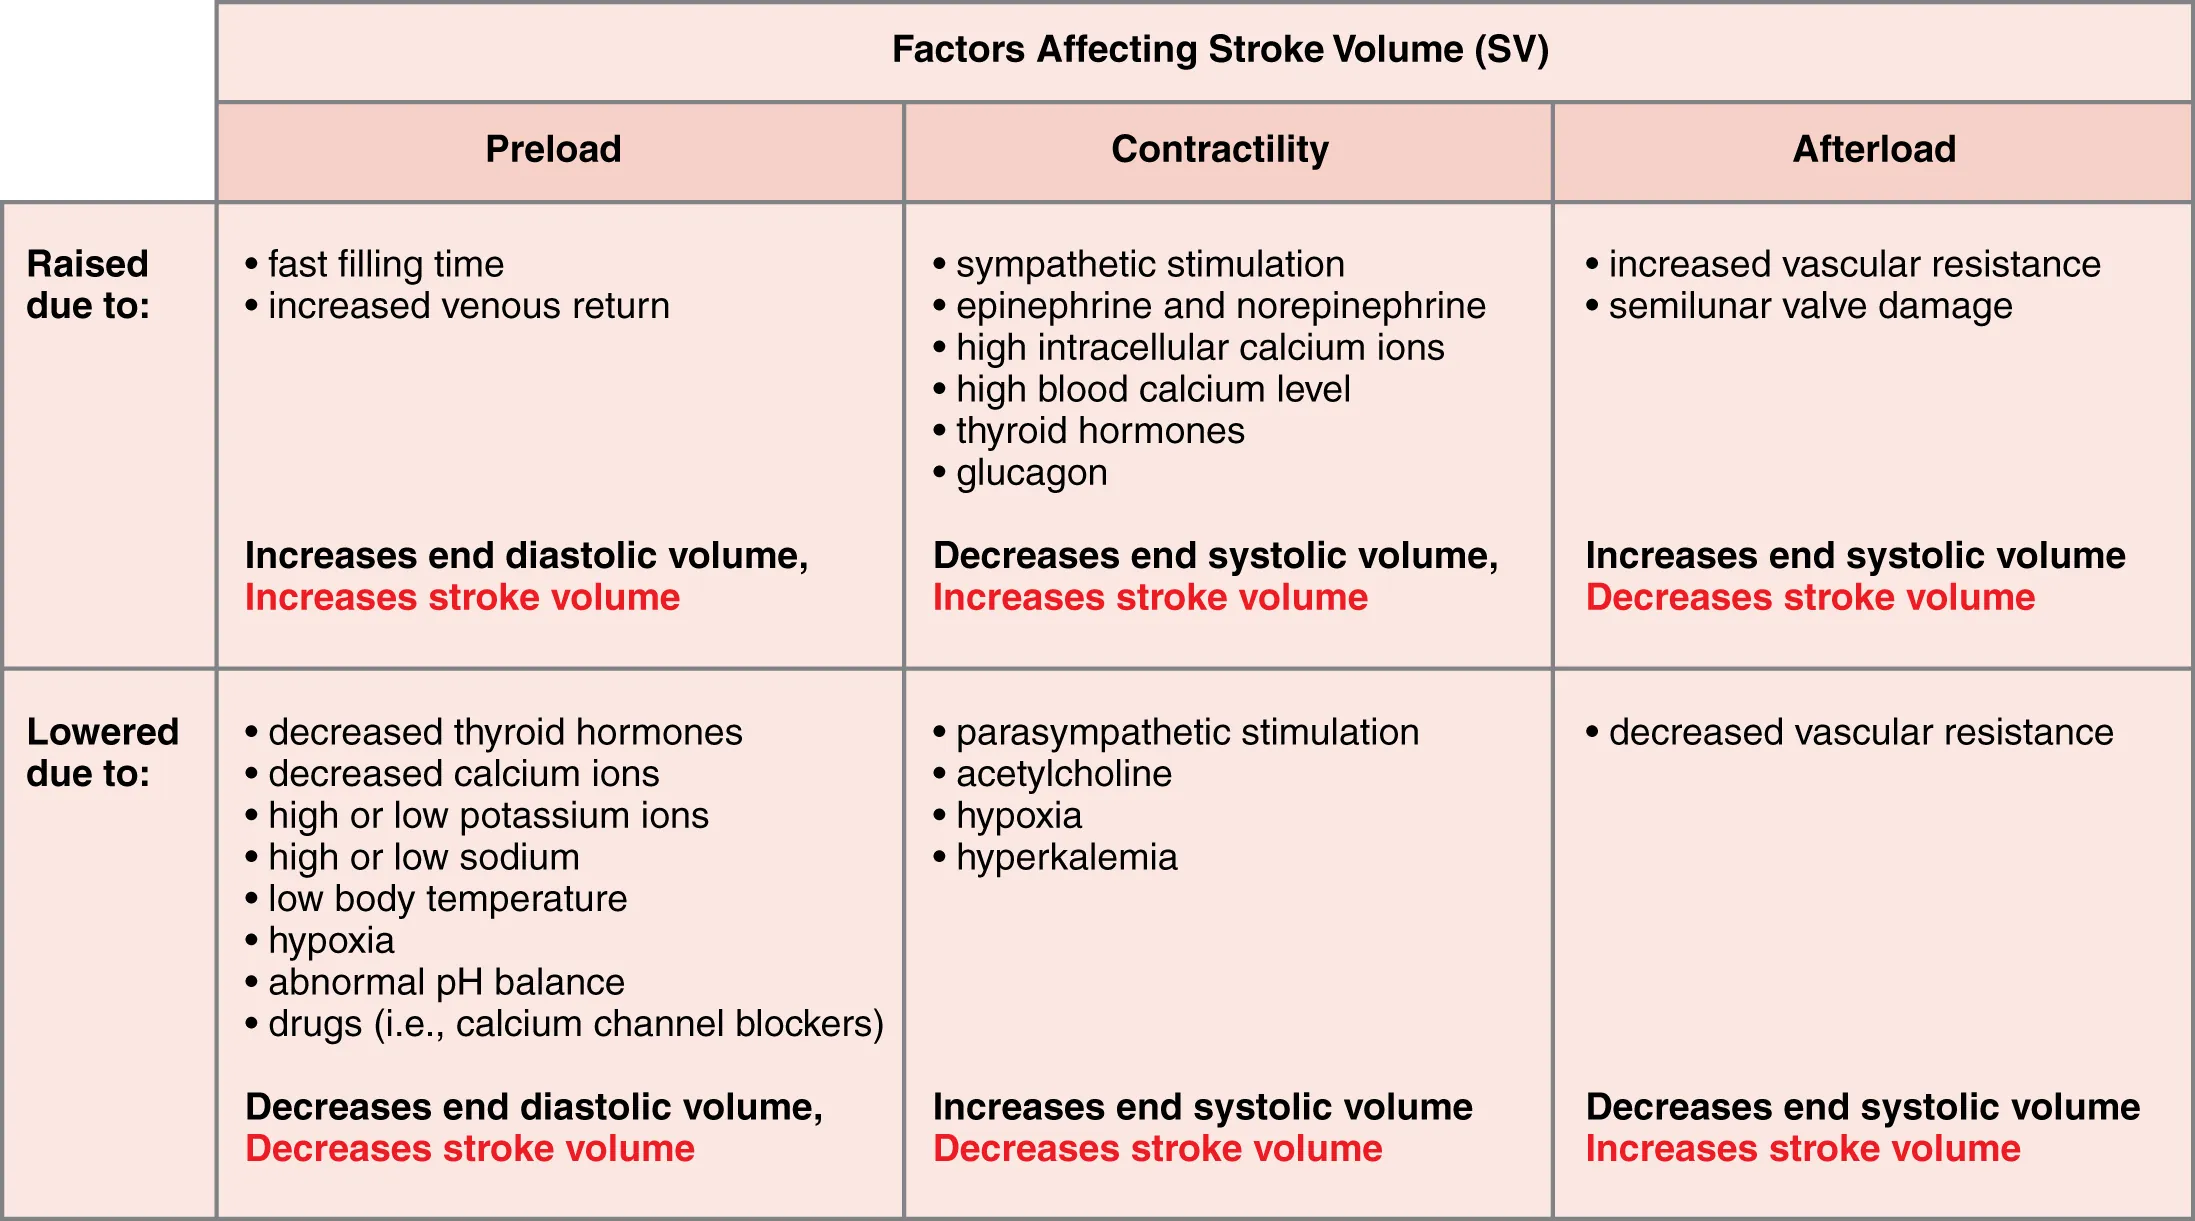 This table describes major factors influencing stroke volume. Preload may be raised due to fast filling time or increased venous return. These factors increase end diastolic volume and increase stroke volume. Preload may be lowered due to decreased thyroid hormones, decreased calcium ions, high or low potassium ions, high or low sodium, low body temperature, hypoxia, abnormal pH balance, or drugs (for example, calcium channel blockers). These factors decrease end diastolic volume and decrease stroke volume. Contractility may be raised due to sympathetic stimulation, epinephrine and norepinephrine, high intracellular calcium ions, high blood calcium level, thyroid hormones, or glucagon. These factors decrease end systolic volume and increase stroke volume. Contractility may be lowered due to parasympathetic stimulation, acetylcholine, hypoxia, or hyperkalemia. These factors increase end systolic volume and decrease stroke volume. Afterload may be raised due to increased vascular resistance or semilunar valve damage. These factors increase end systolic volume and decrease stroke volume. Afterload may be lowered due to decreased vascular resistance. This factor decreases end systolic volume and increases stroke volume.